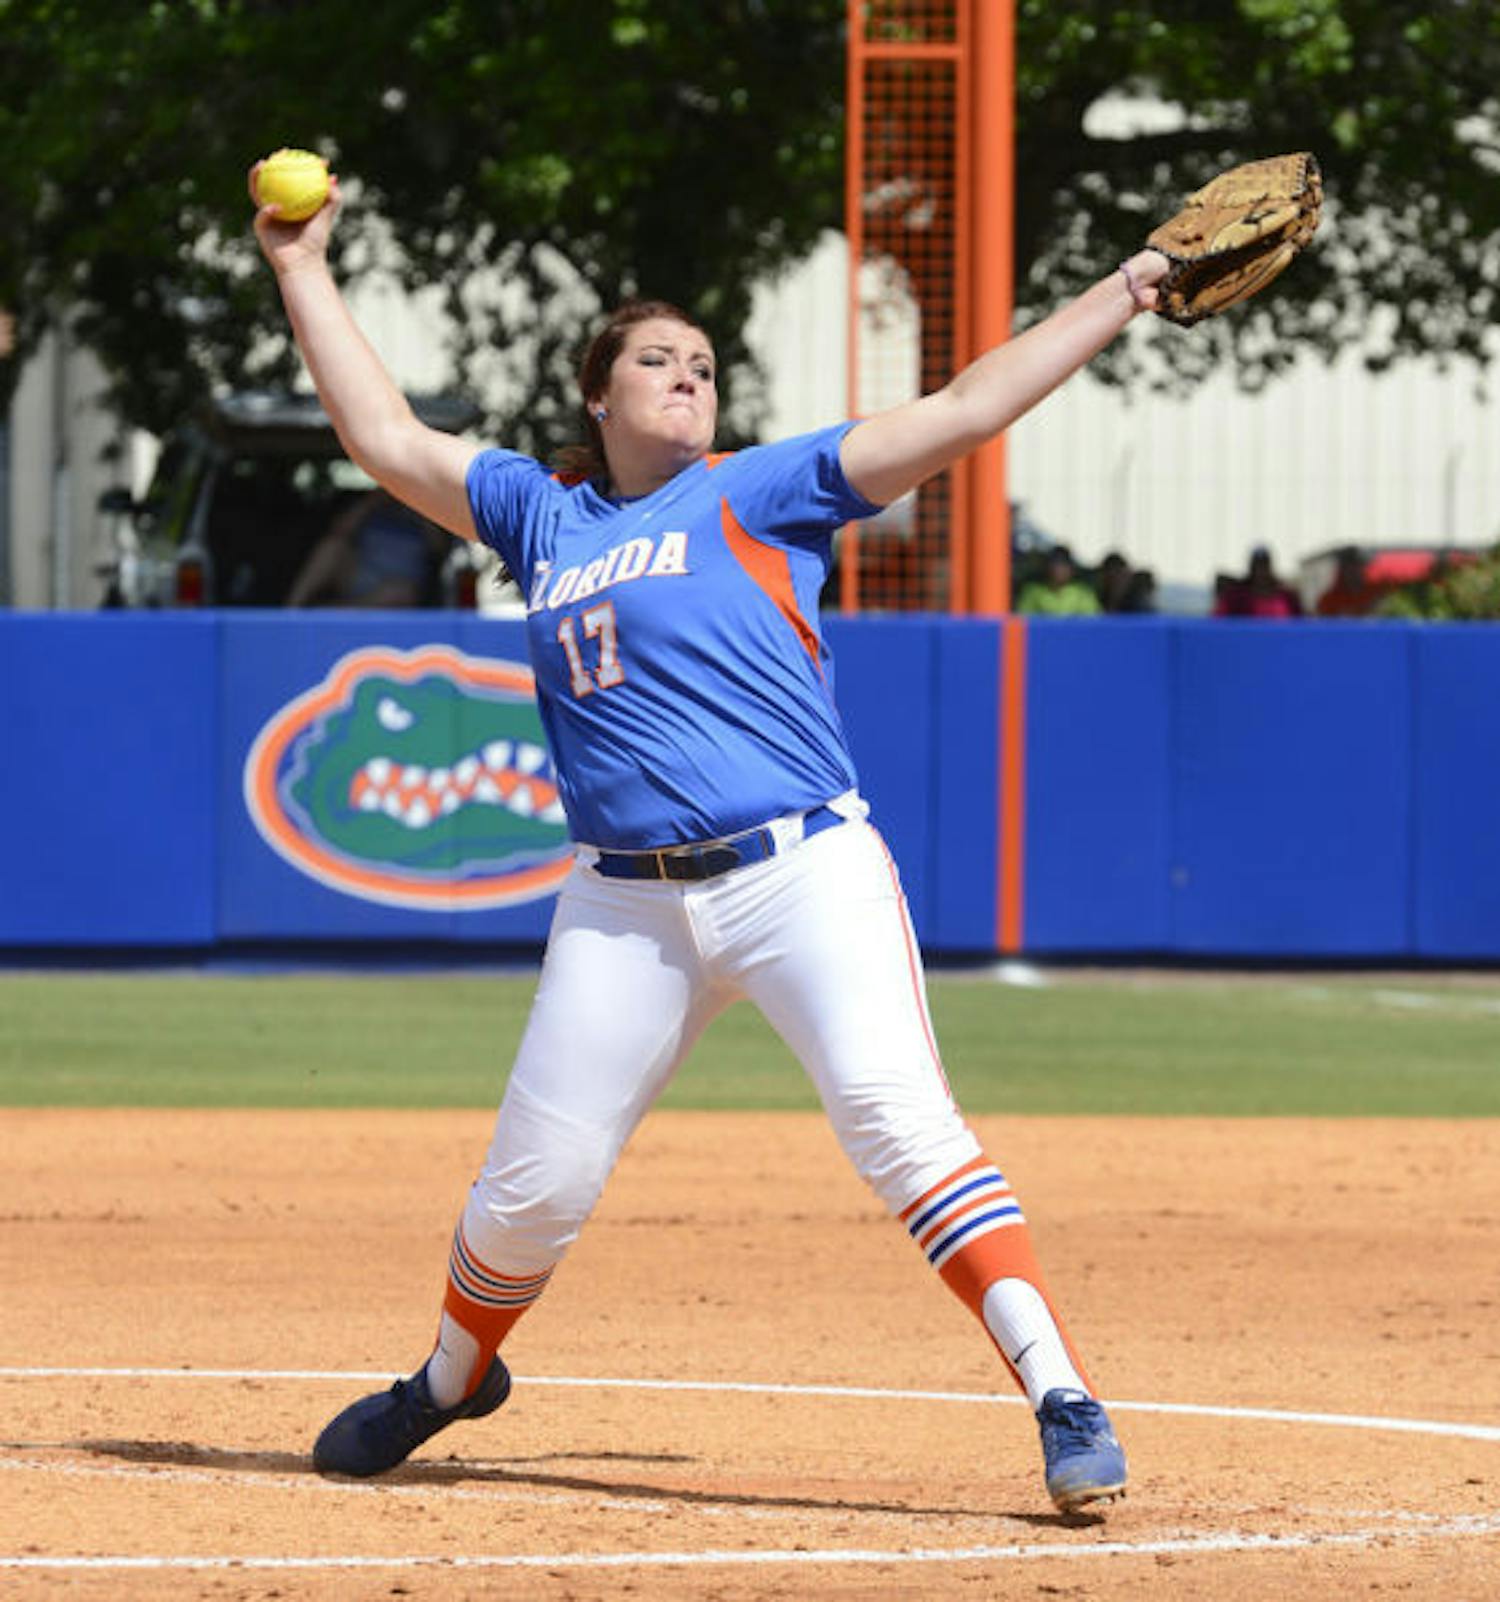 Lauren Haeger pitches during Florida’s win against Mississippi State on Apr. 6, 2013, at Katie Seashole Pressly Stadium.